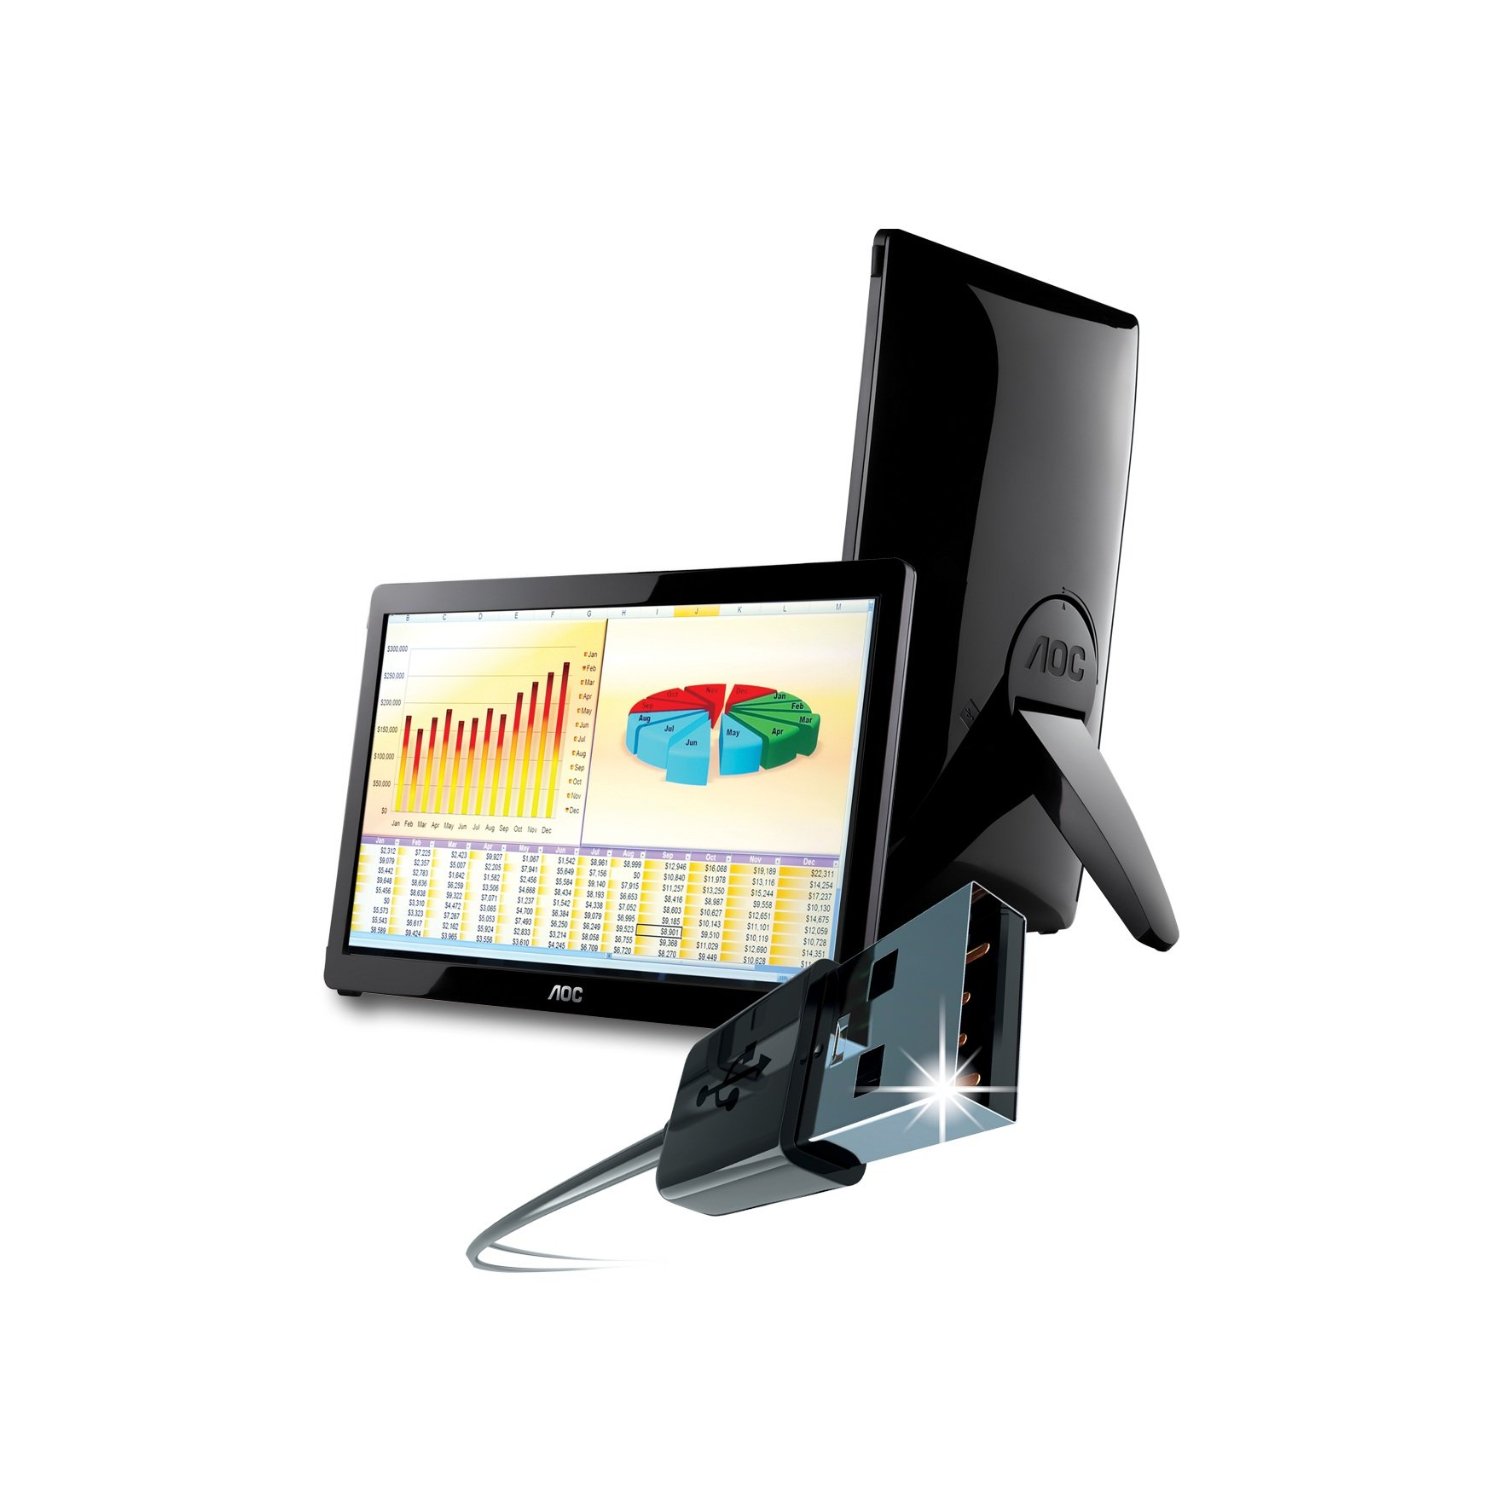 http://thetechjournal.com/wp-content/uploads/images/1203/1333208605-aoc-e1649fwu-16-usbpowered-portable-led-monitor--5.jpg